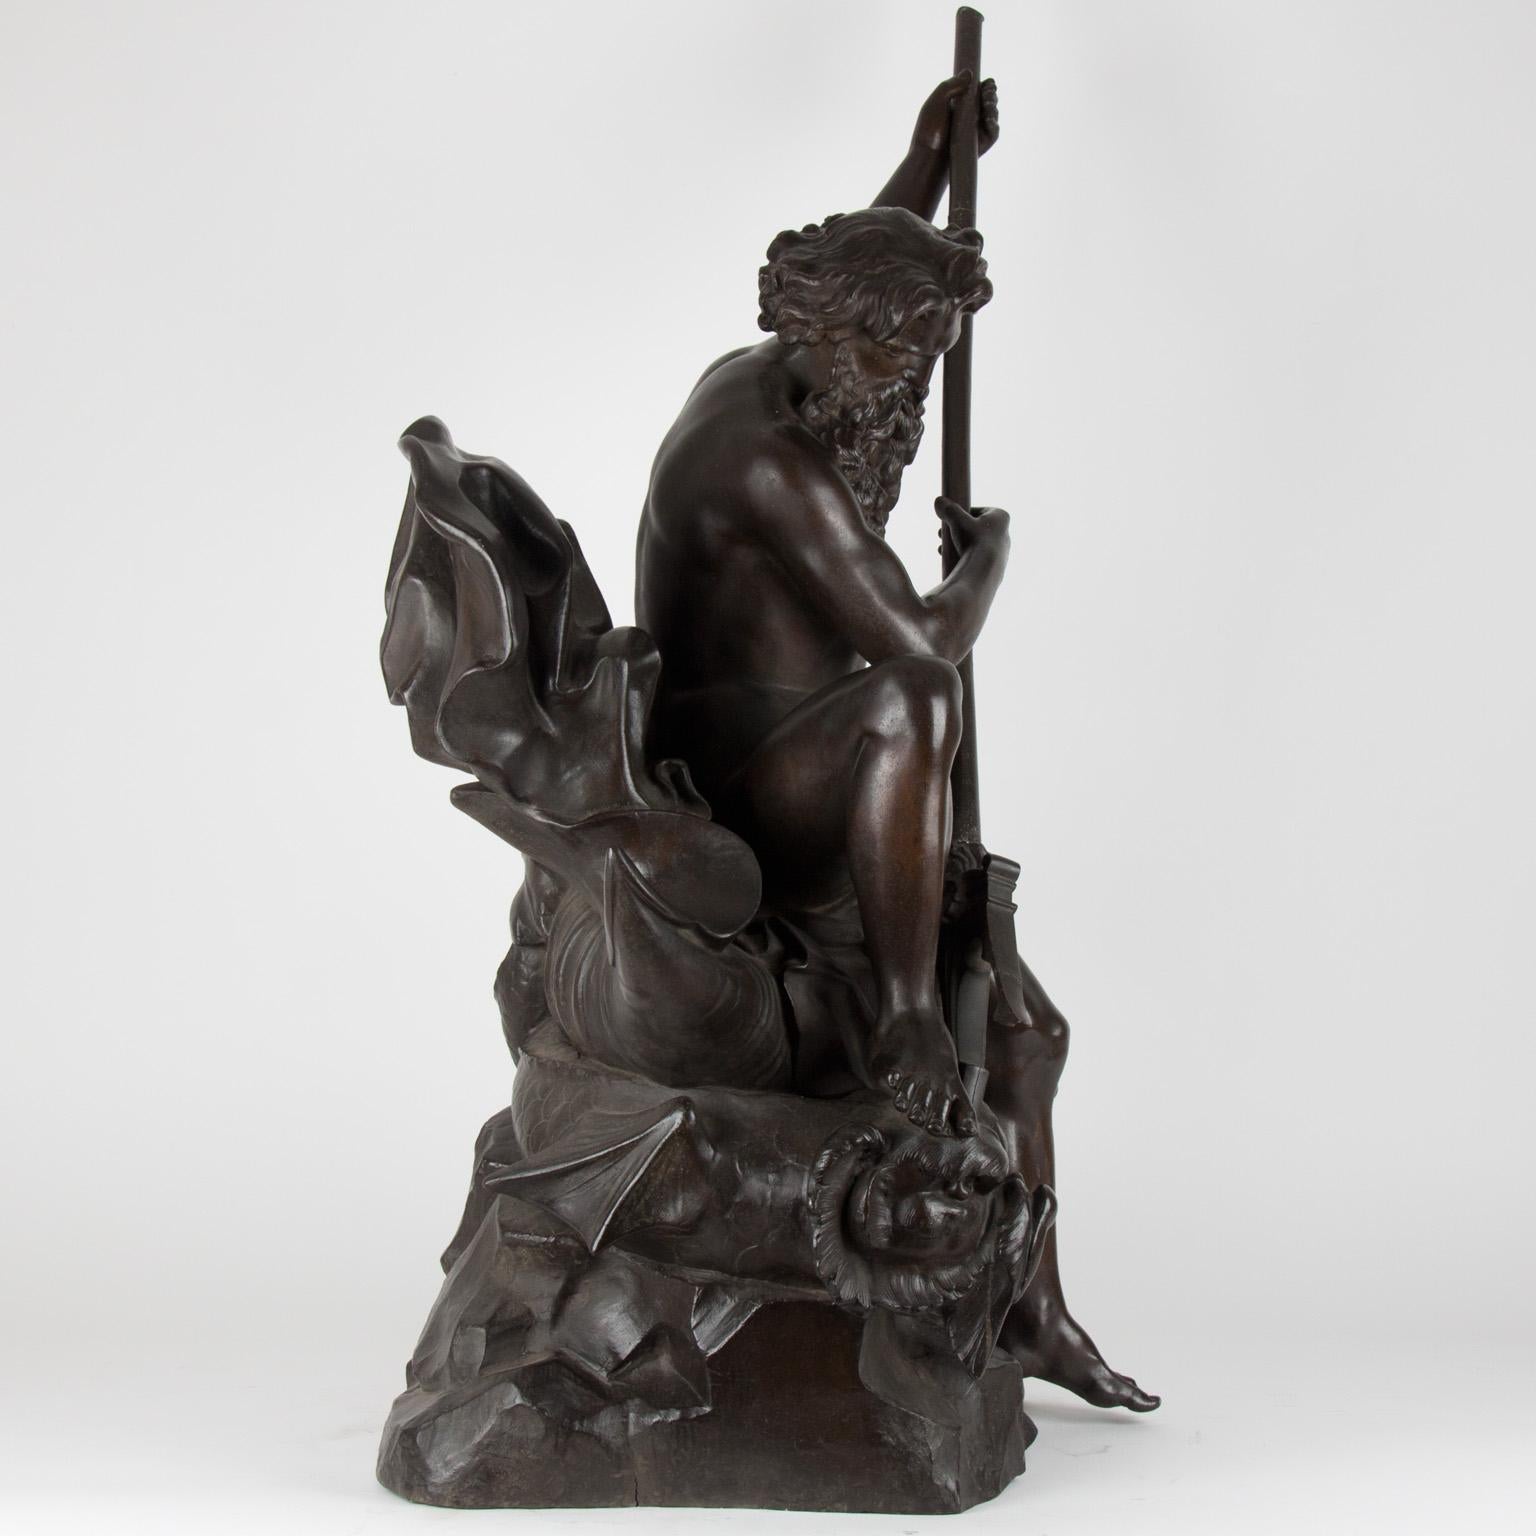 Patinated Large 19th Century Zamac Statue Depicting Neptune Sitting on Two Dolphins